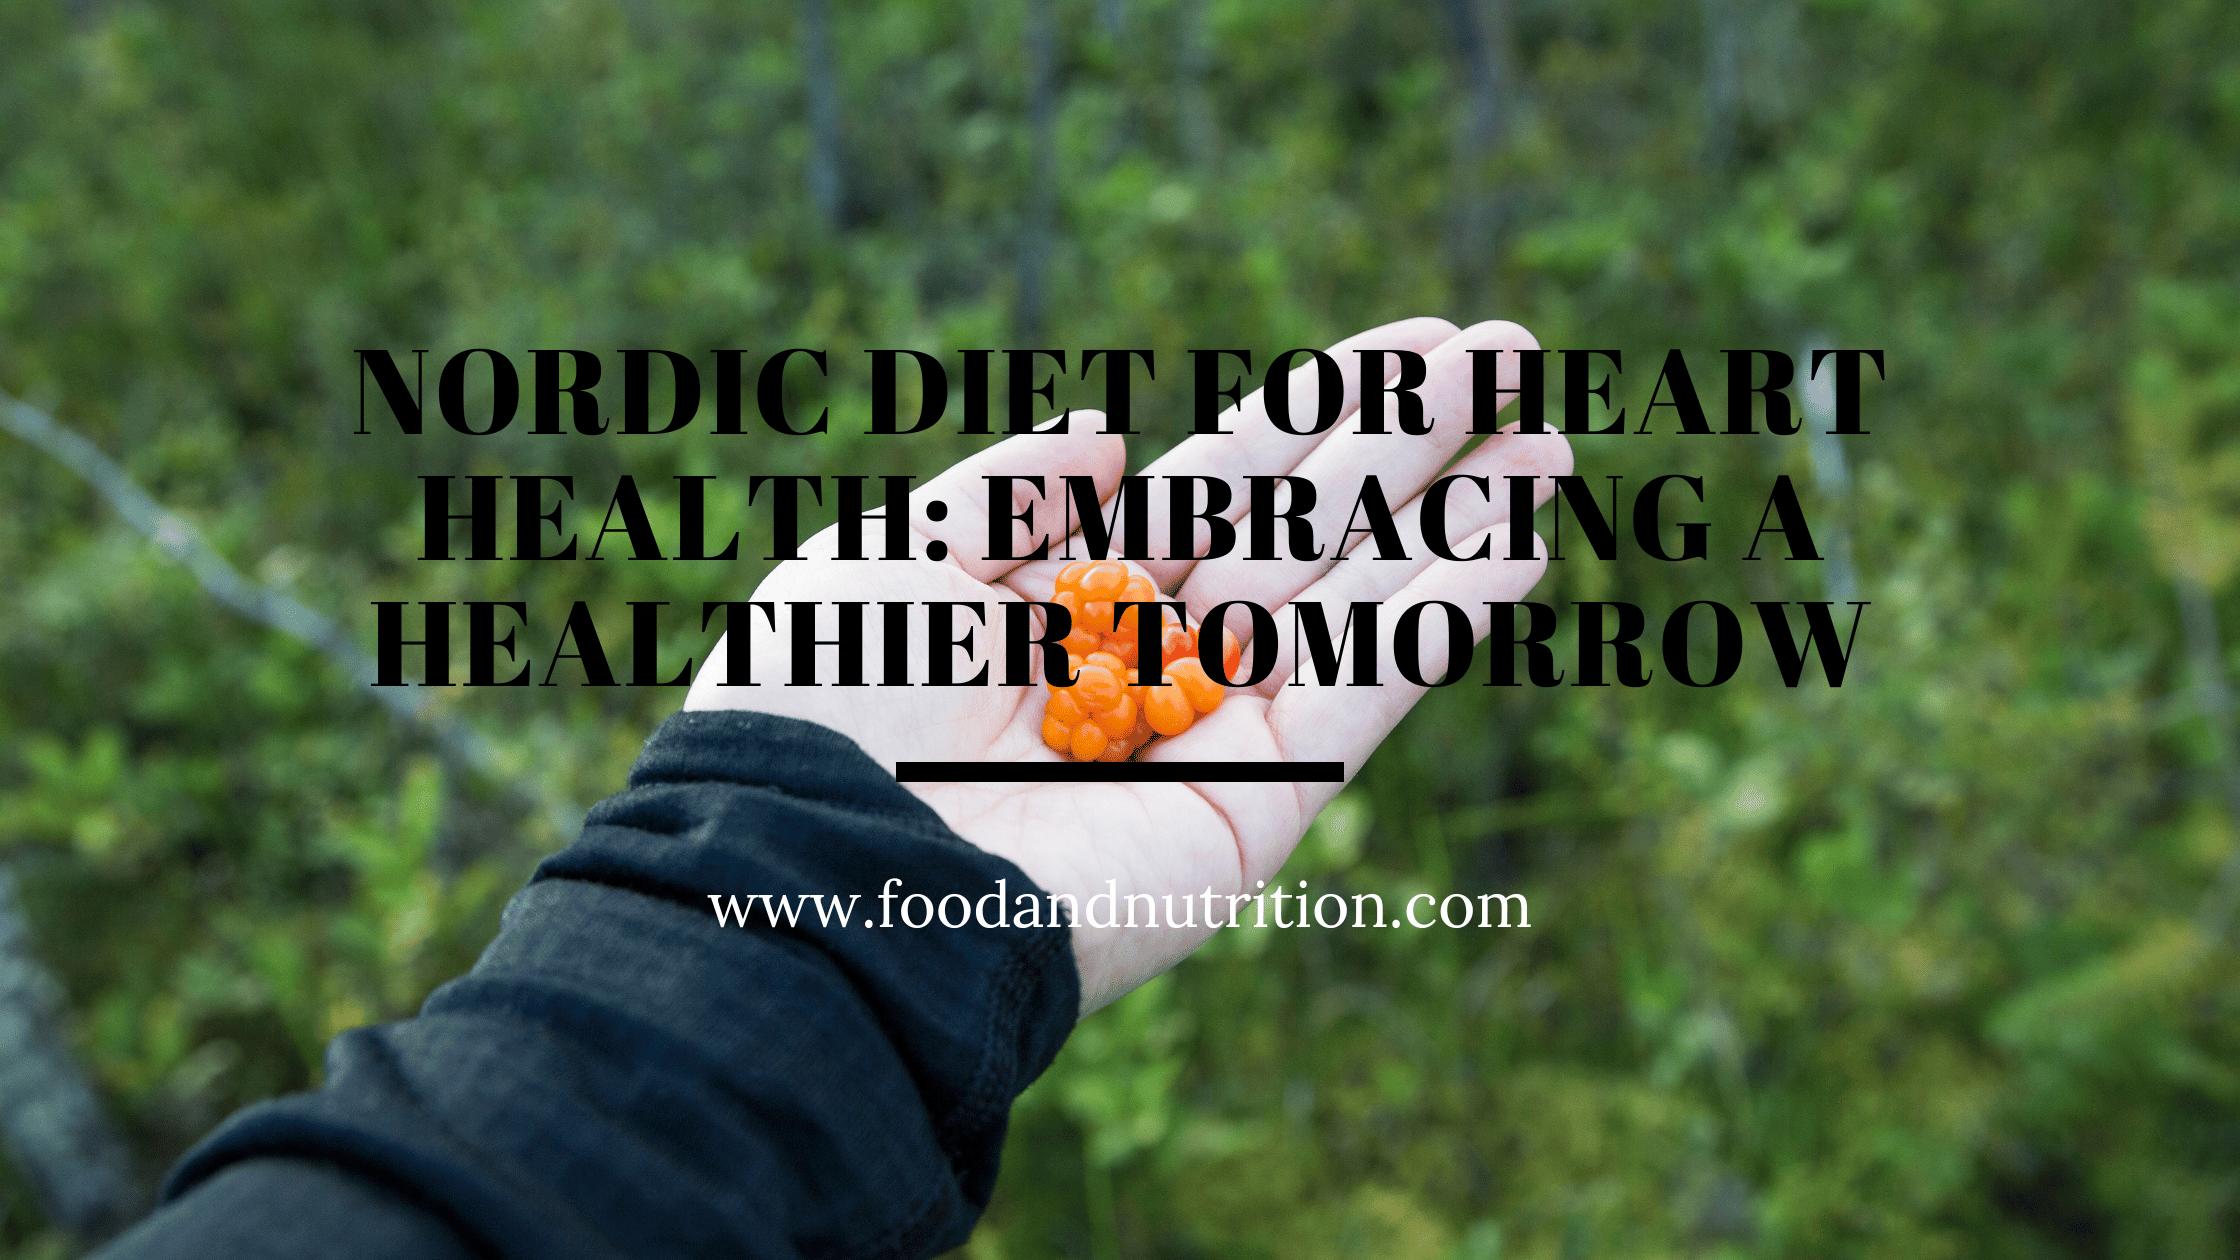 Nordic Diet for Heart Health: Embracing a Healthier Tomorrow